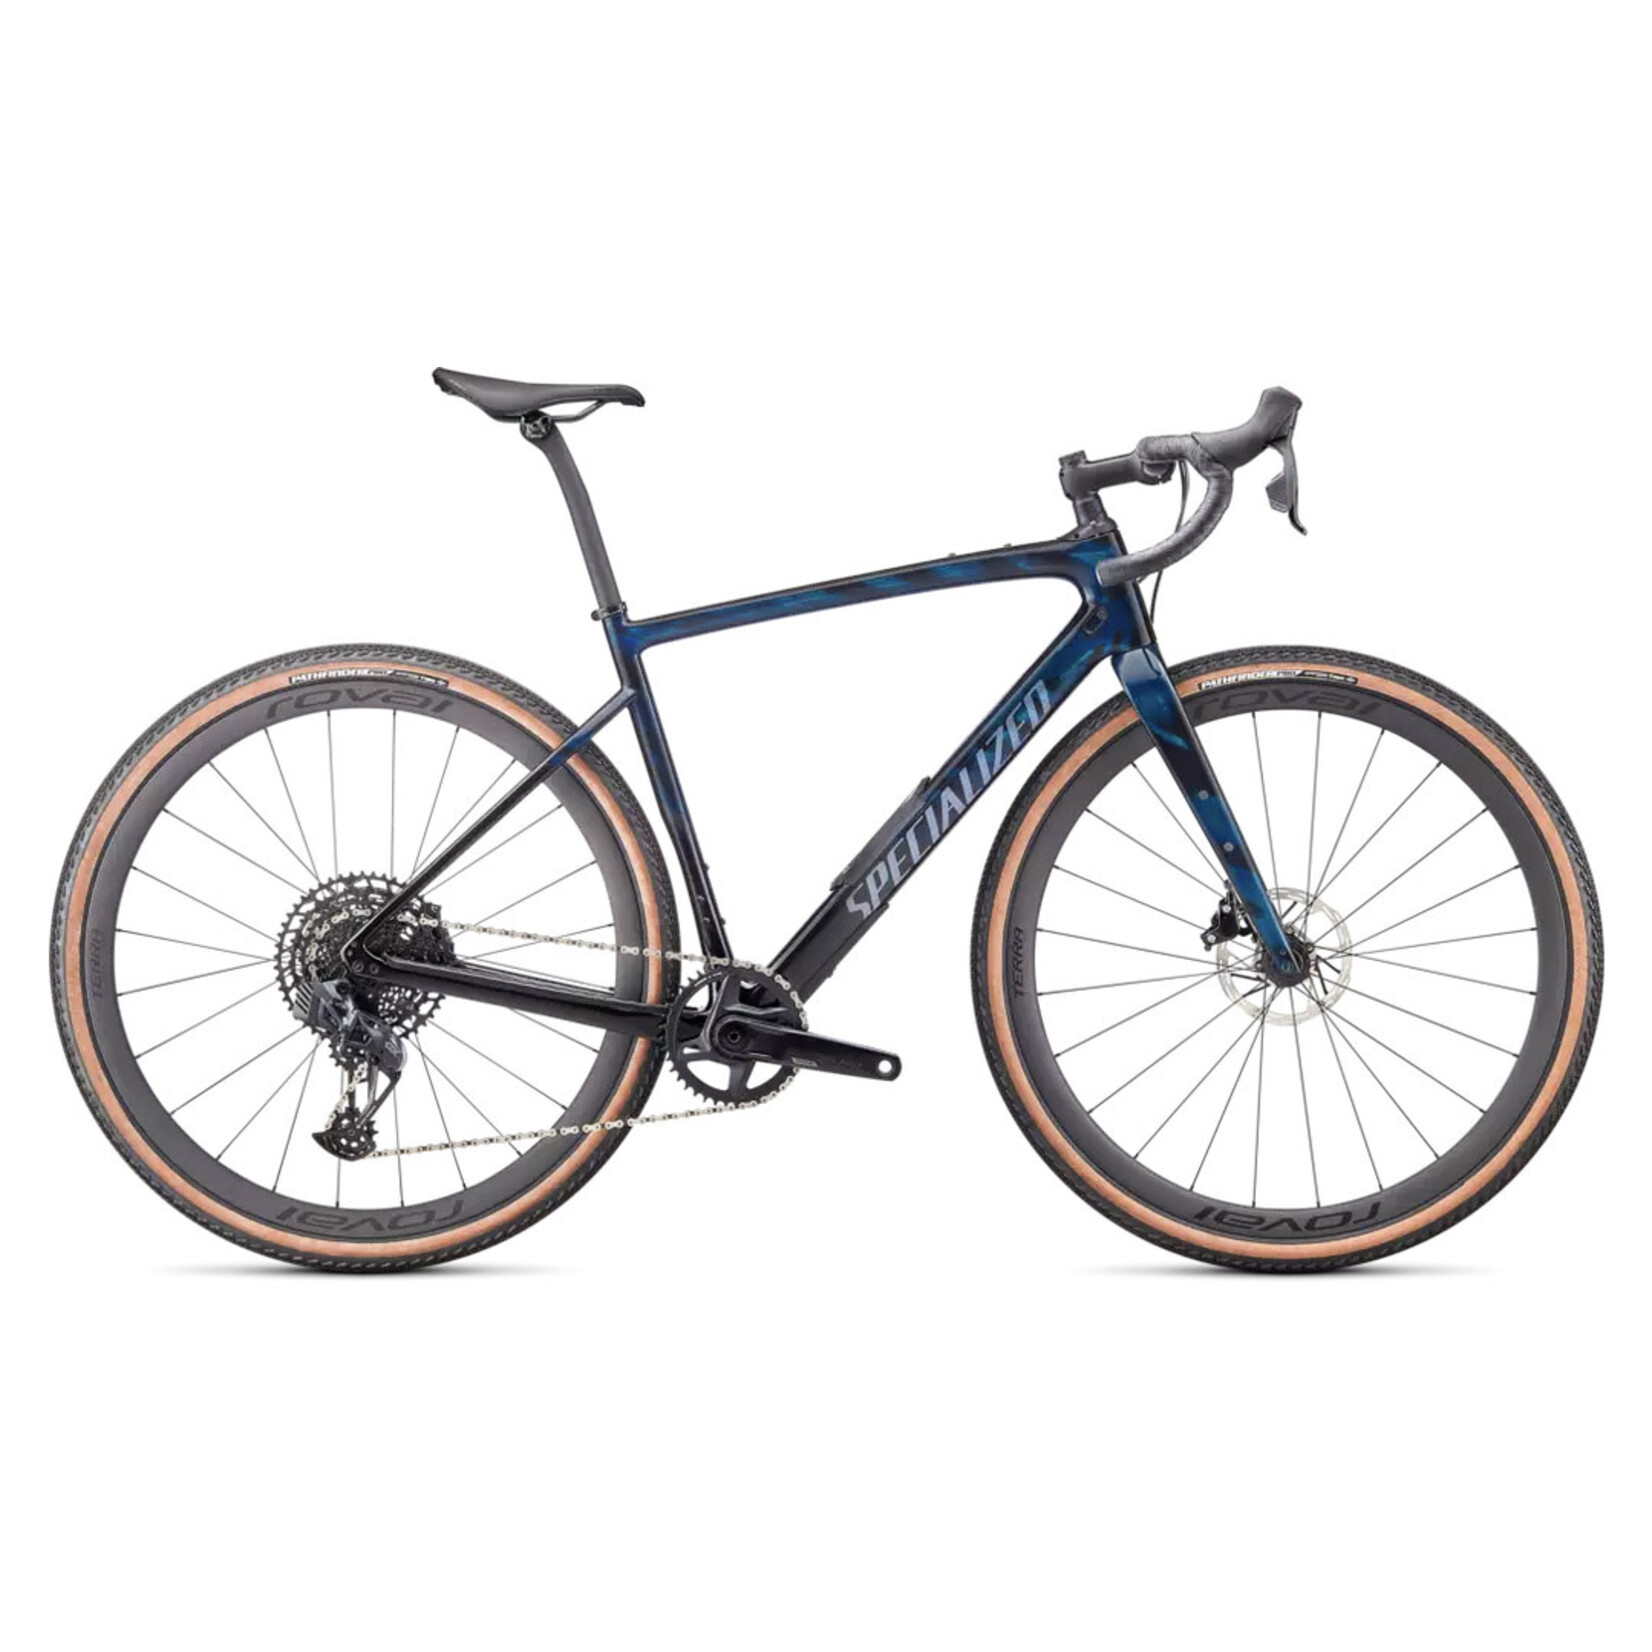 Specialized Diverge Expert Carbon 58